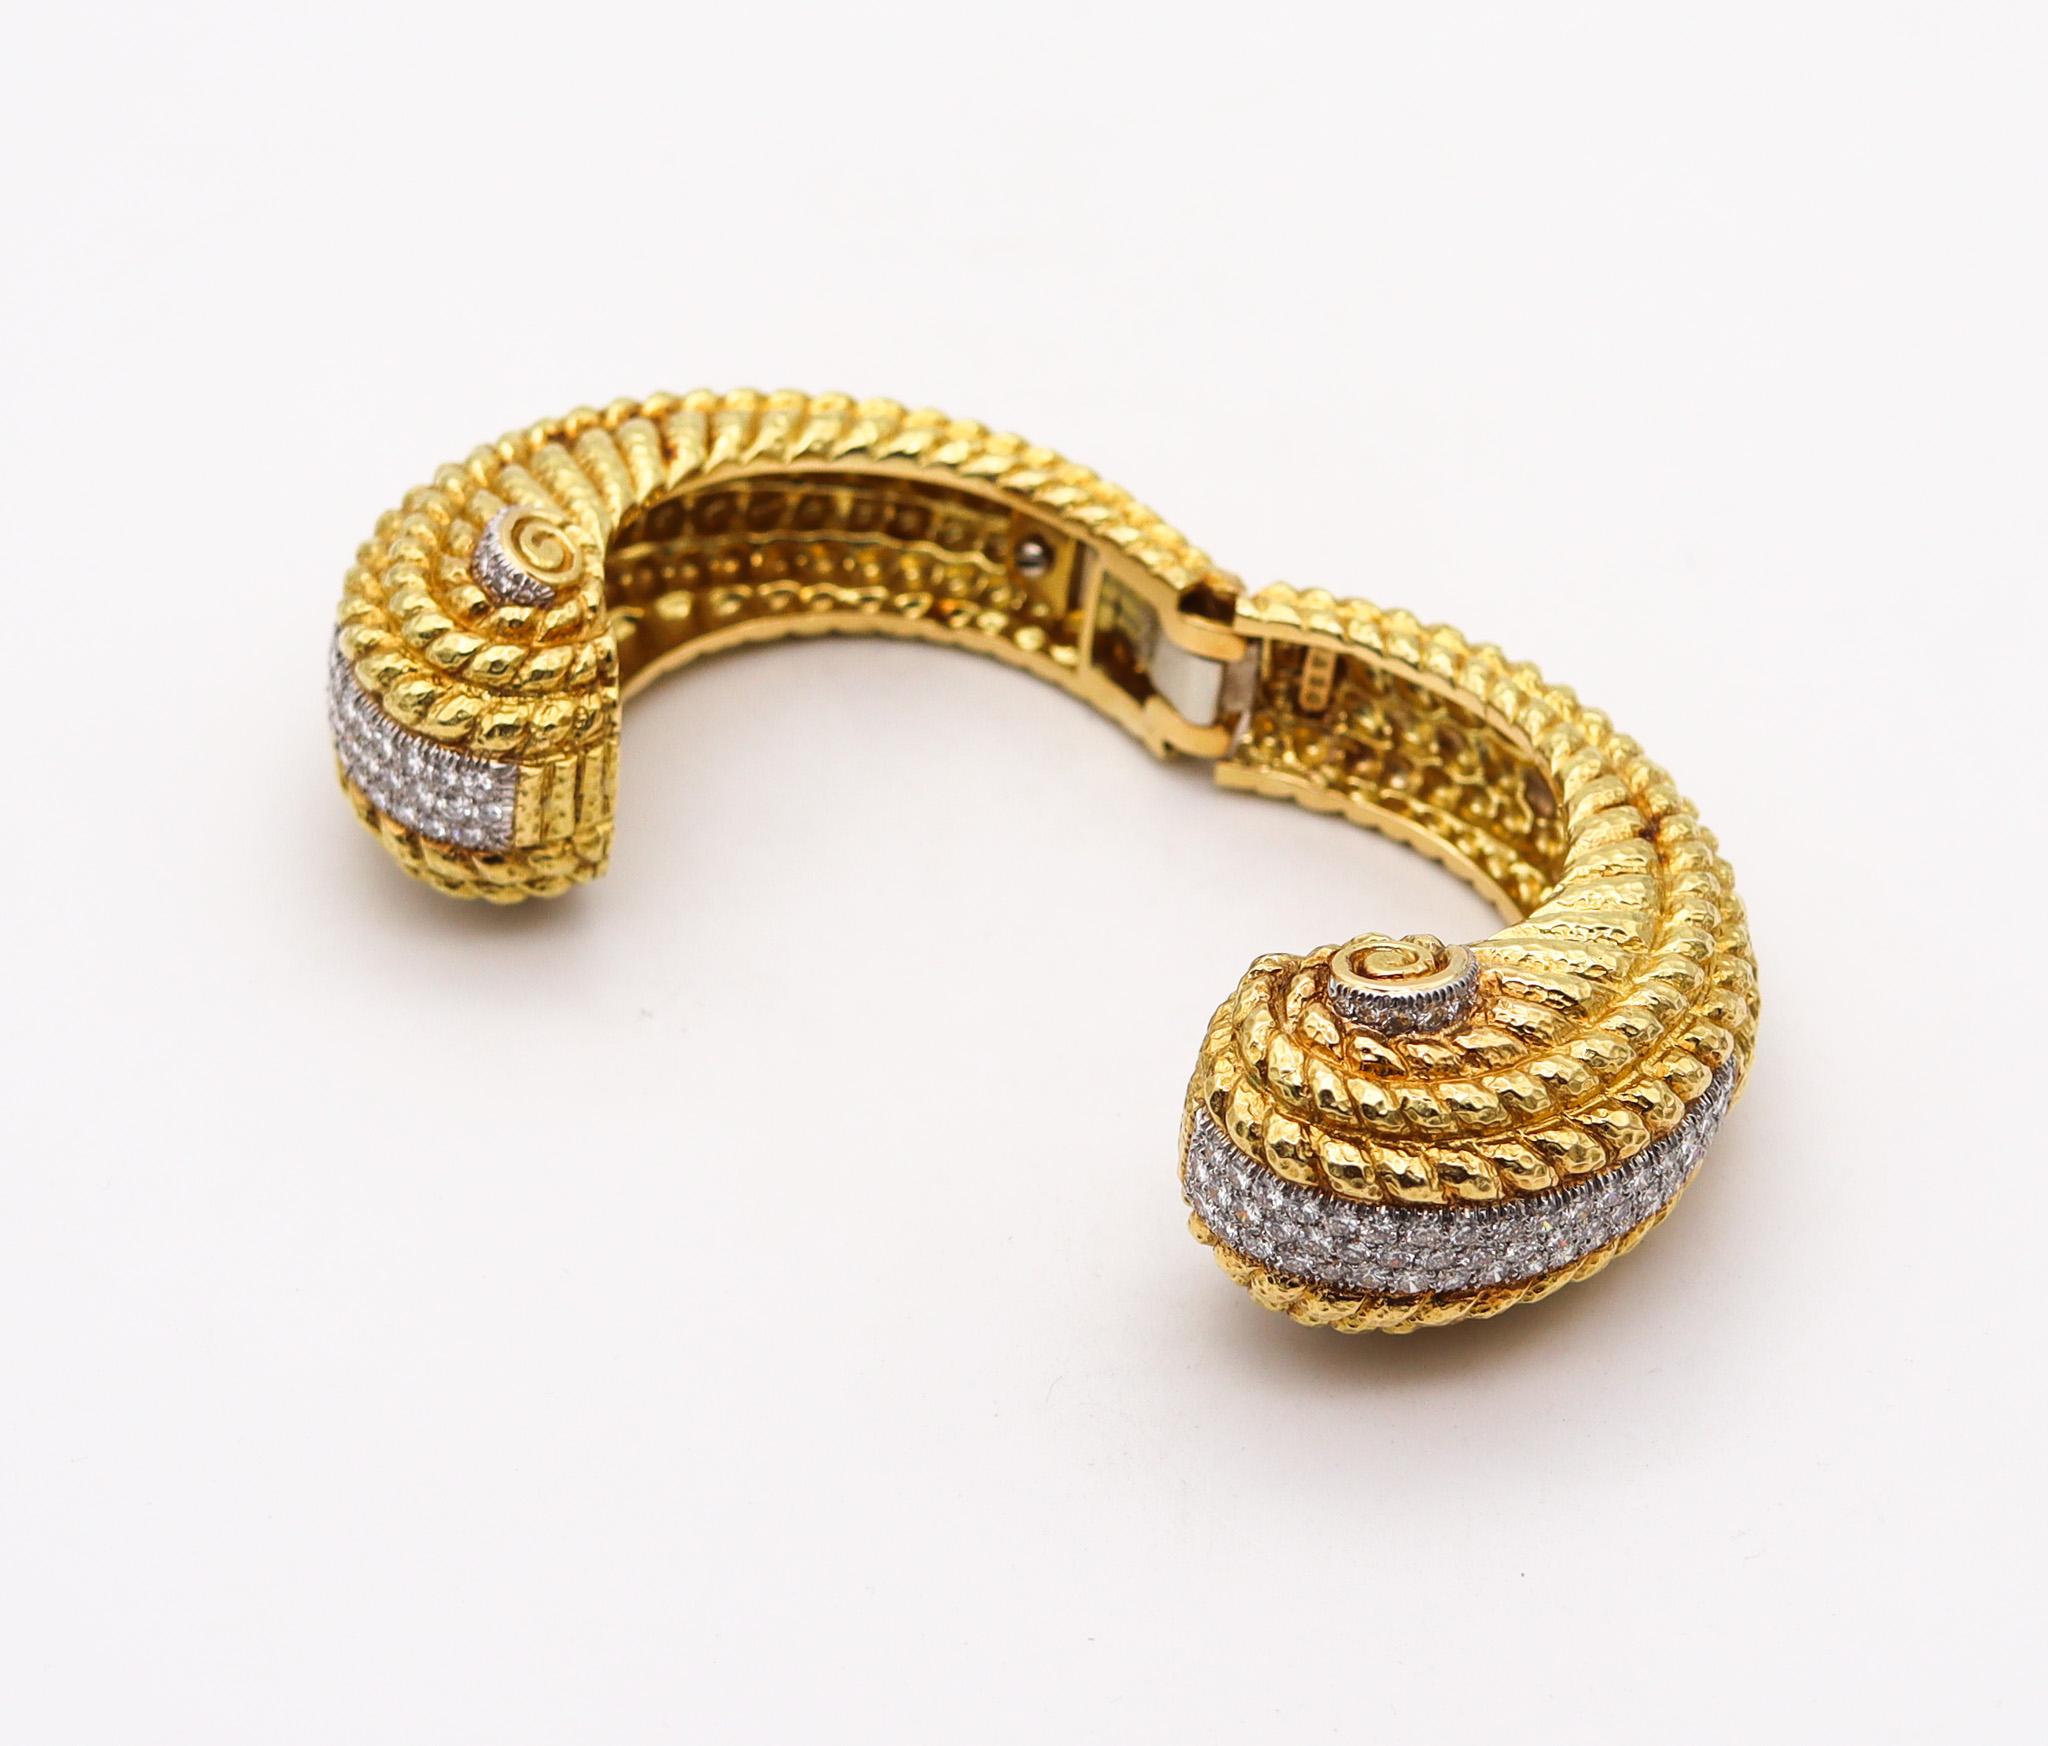 Women's David Webb 1960 Bangle Bracelet in 18kt Yellow Gold with 9.52 Ctw in Diamonds For Sale